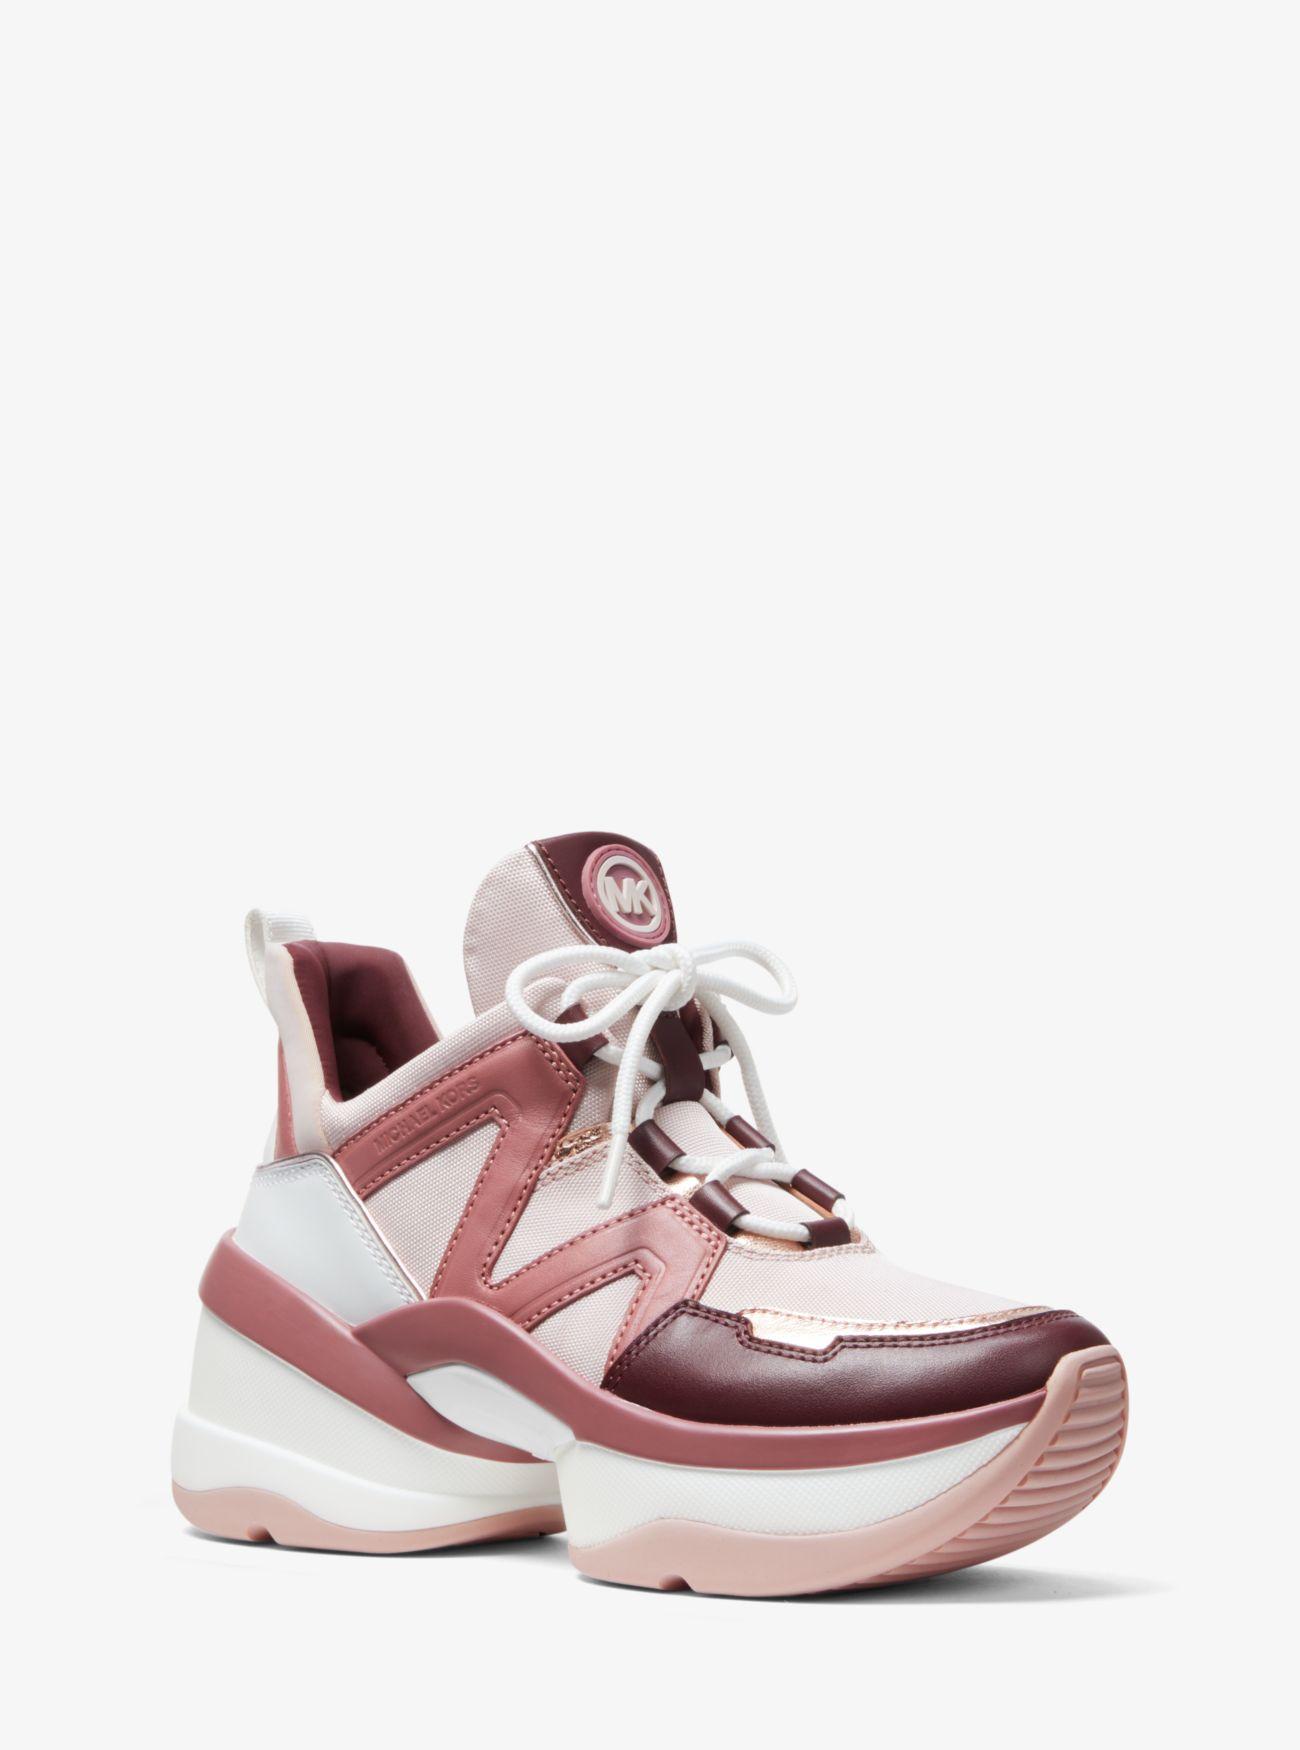 Legitim Korrupt Patent Michael Kors Canvas Michael S Olympia Leather Low Top Lace Up Fashion  Sneakers in Soft Pink (Pink) - Lyst